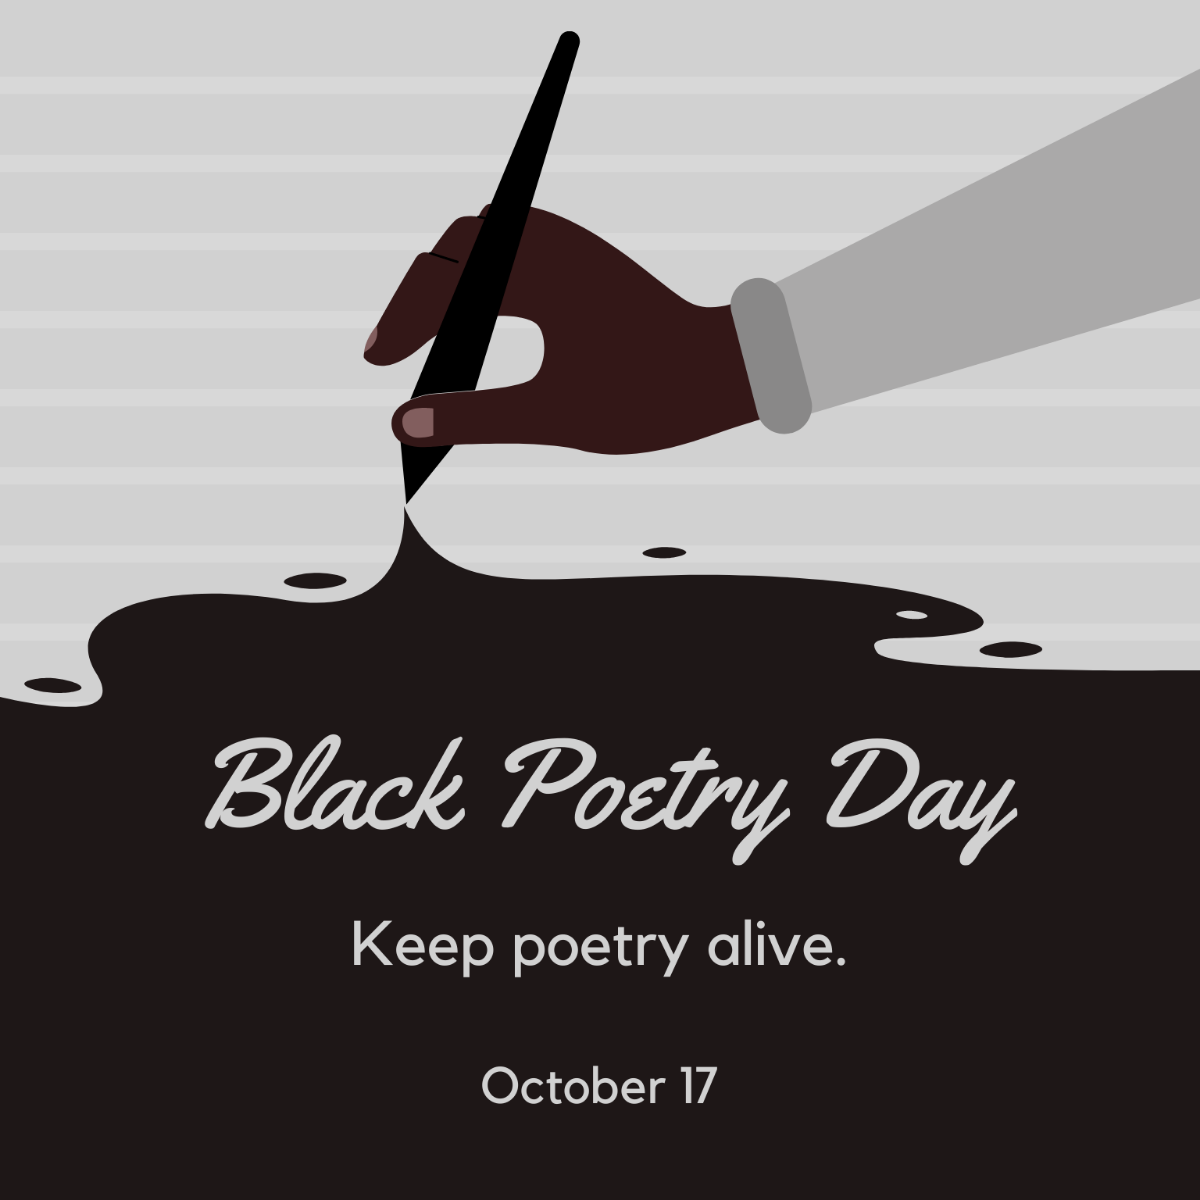 Black Poetry Day Poster Vector